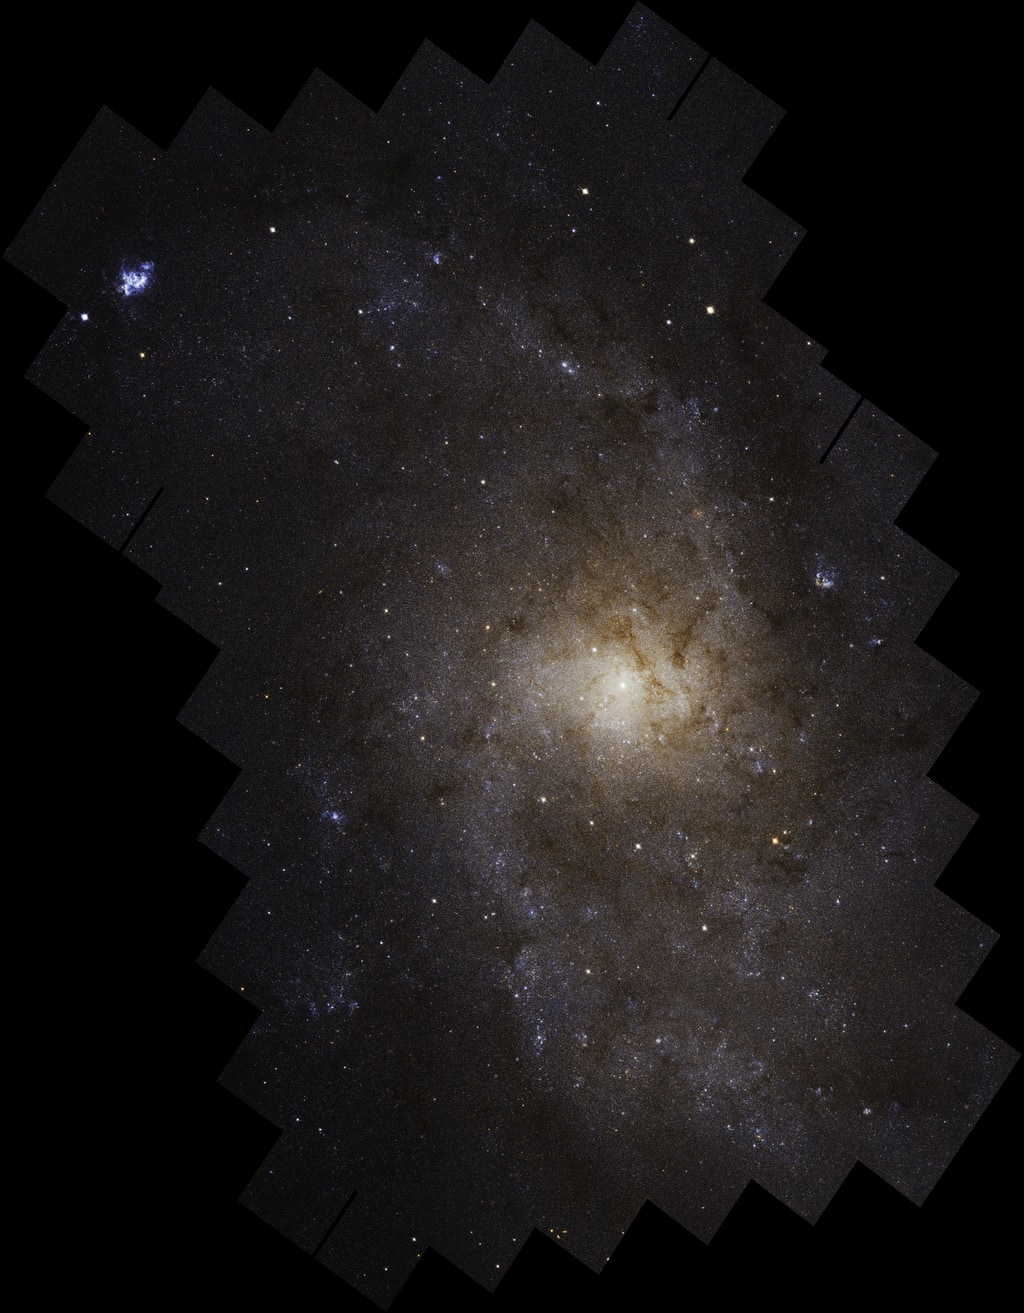 Full Hubble mosaic image of the Triangulum galaxy (M33), composed of 54 Hubble fields of view stitched together. The borders of individual Hubble images trace the jagged edge of the mosaic, which spans 19,400 light-years across.